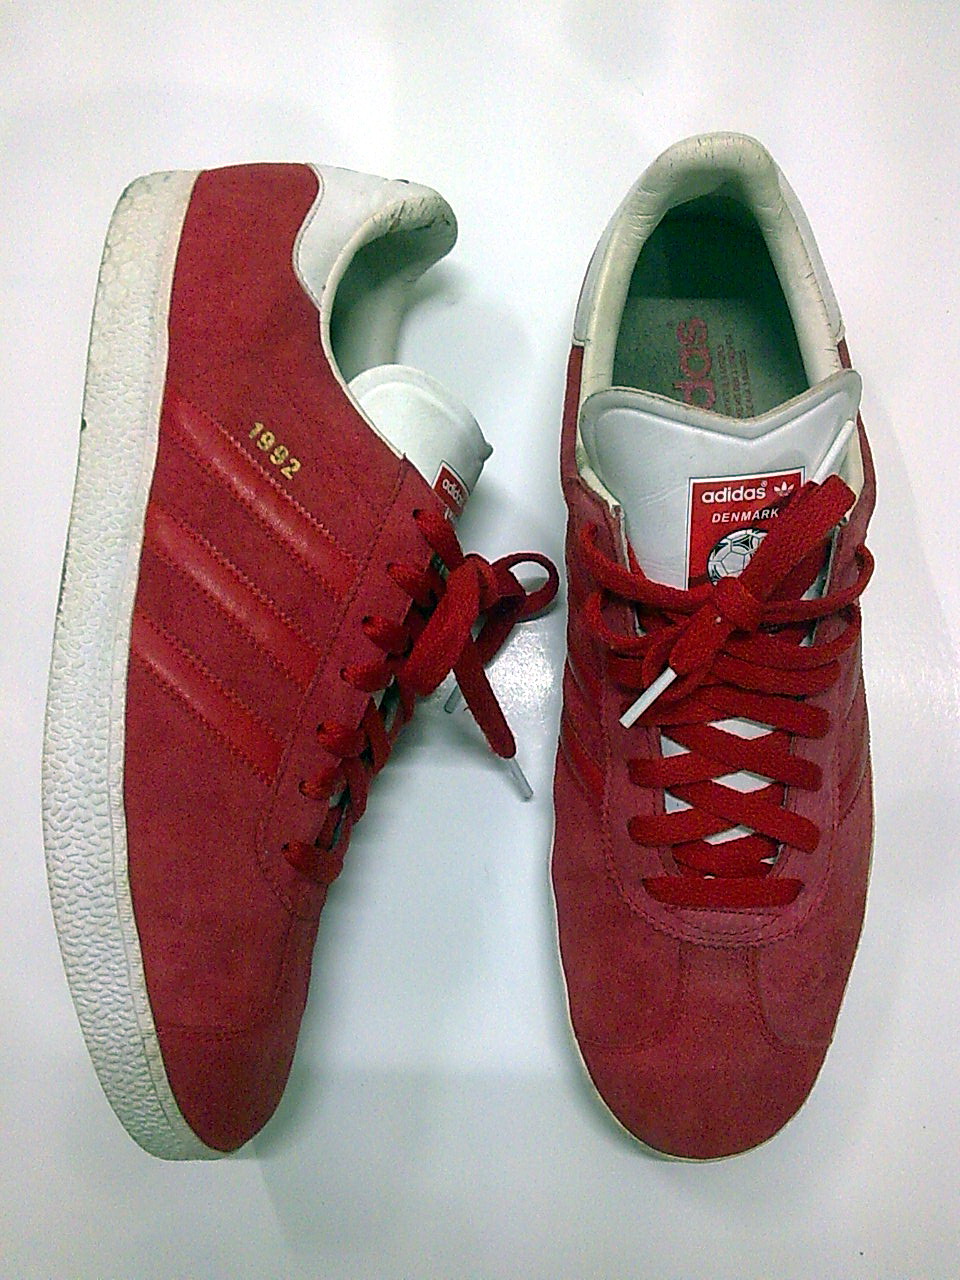 ADIDAS DENMARK 1992 SIZE 12 (SOLD) ~ different class bundle